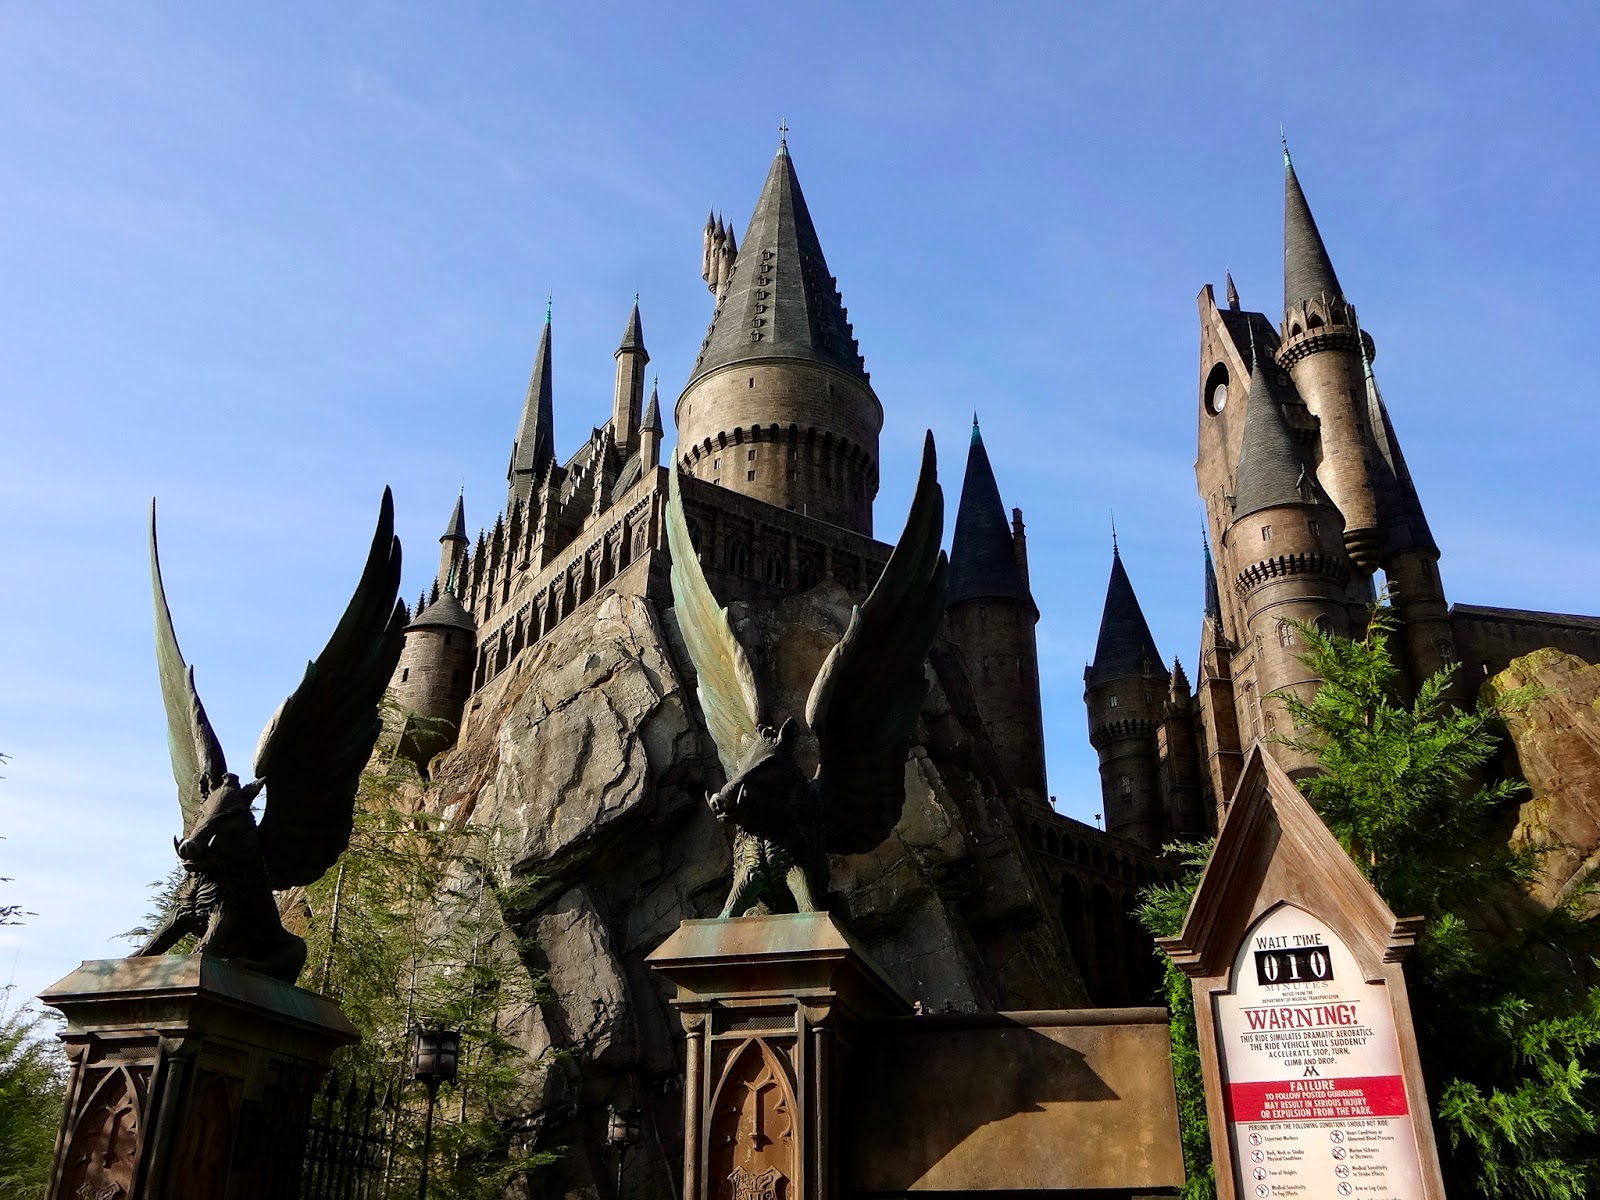 Hogwarts Castle at the Wizarding World of Harry Potter - The World of Deej